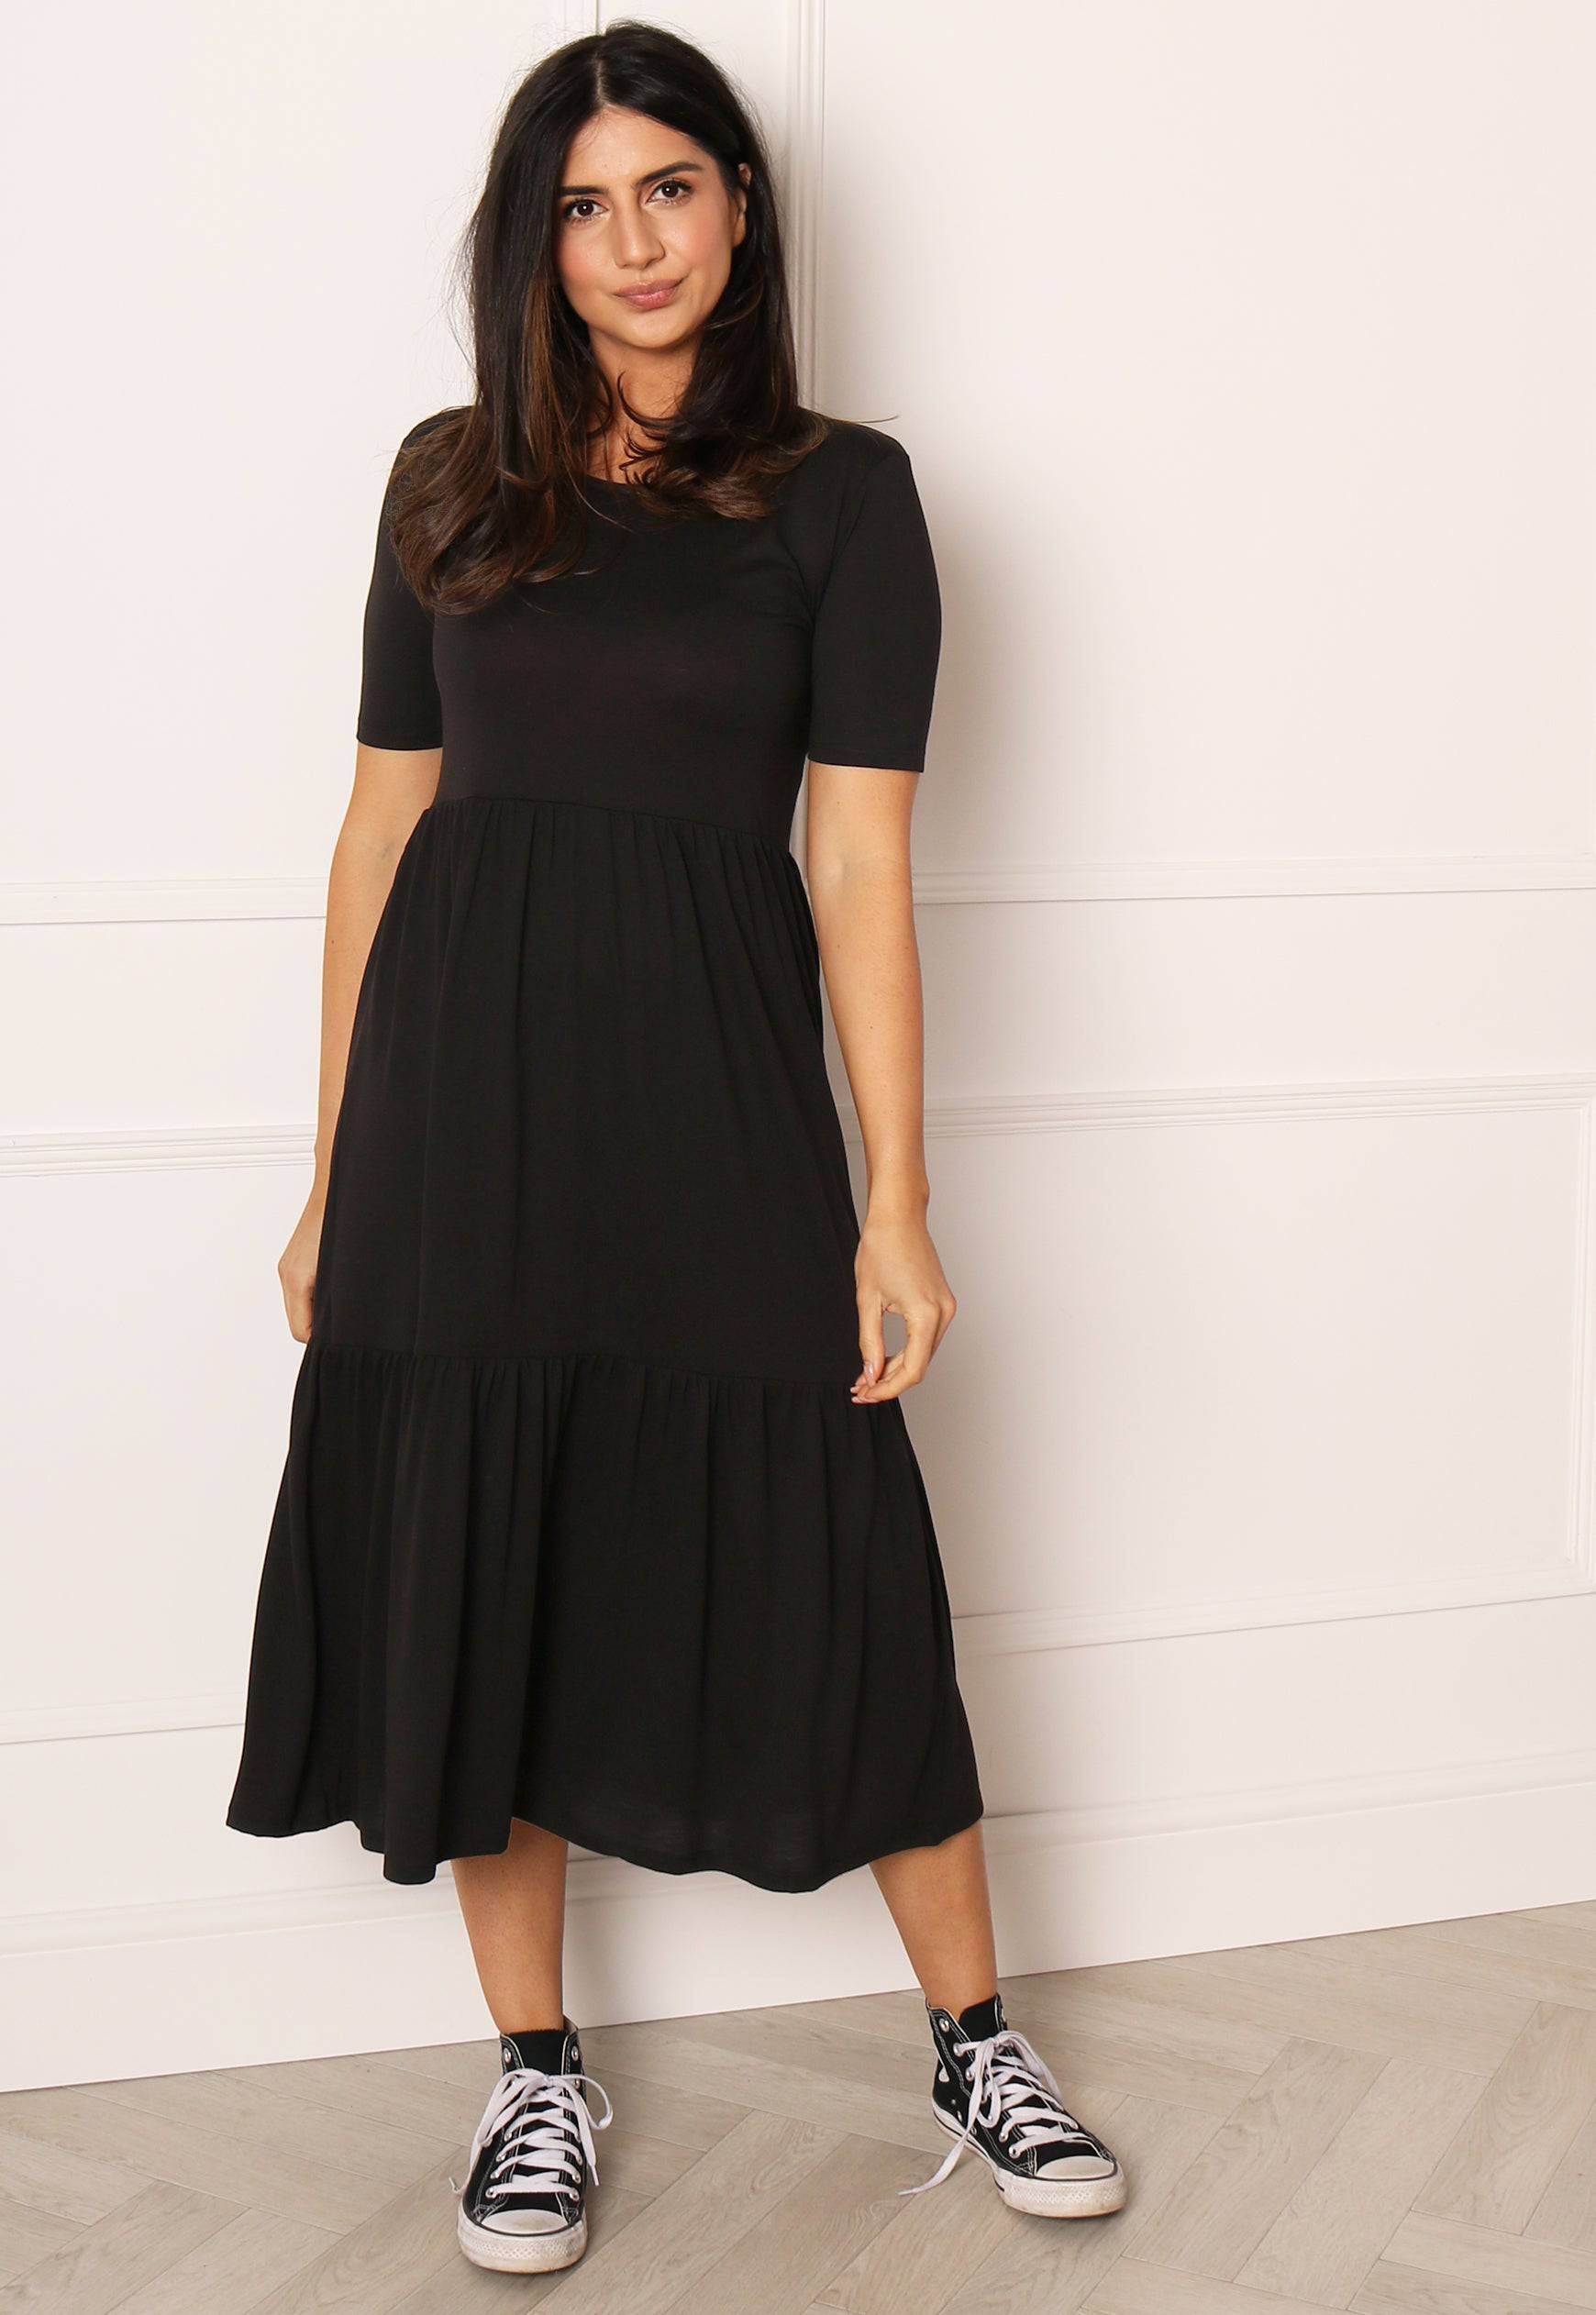 JDY Tiered Black Dress One Summer Tiered in Jersey Jersey Midi JDY Clothing Dress Black | in Summer Midi Nation